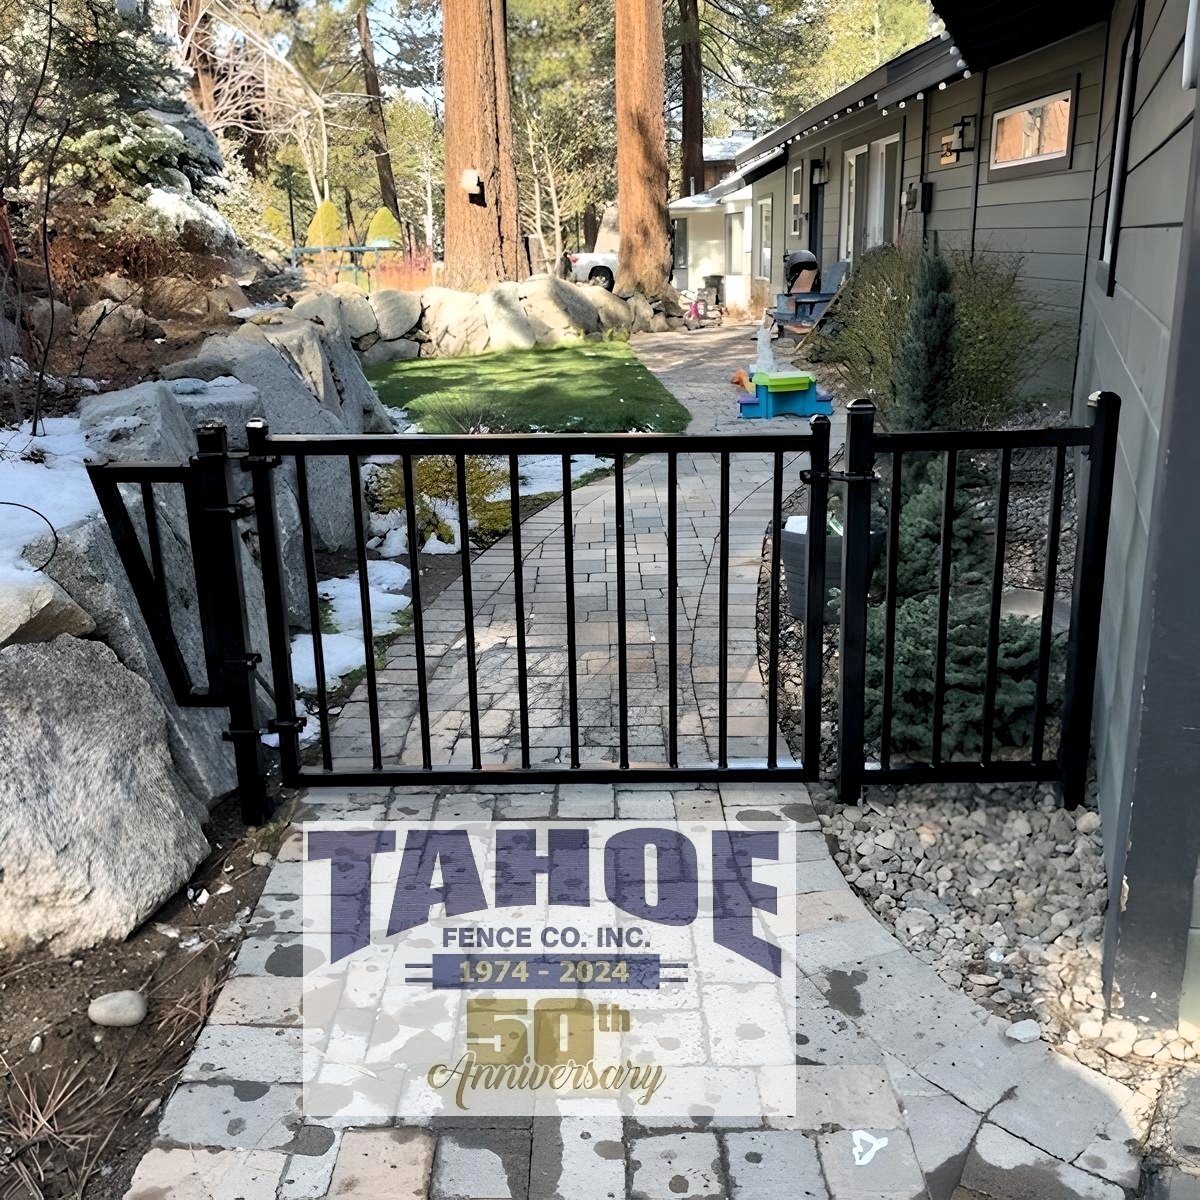 Thank Your Mom This weekend is Mother's Day. However you celebrate mom, have a happy Mother's Day. Thank you mom! Pictured: Play yard ornamental iron gate and panels by Tahoe Fence at Incline Village (Washoe County.)